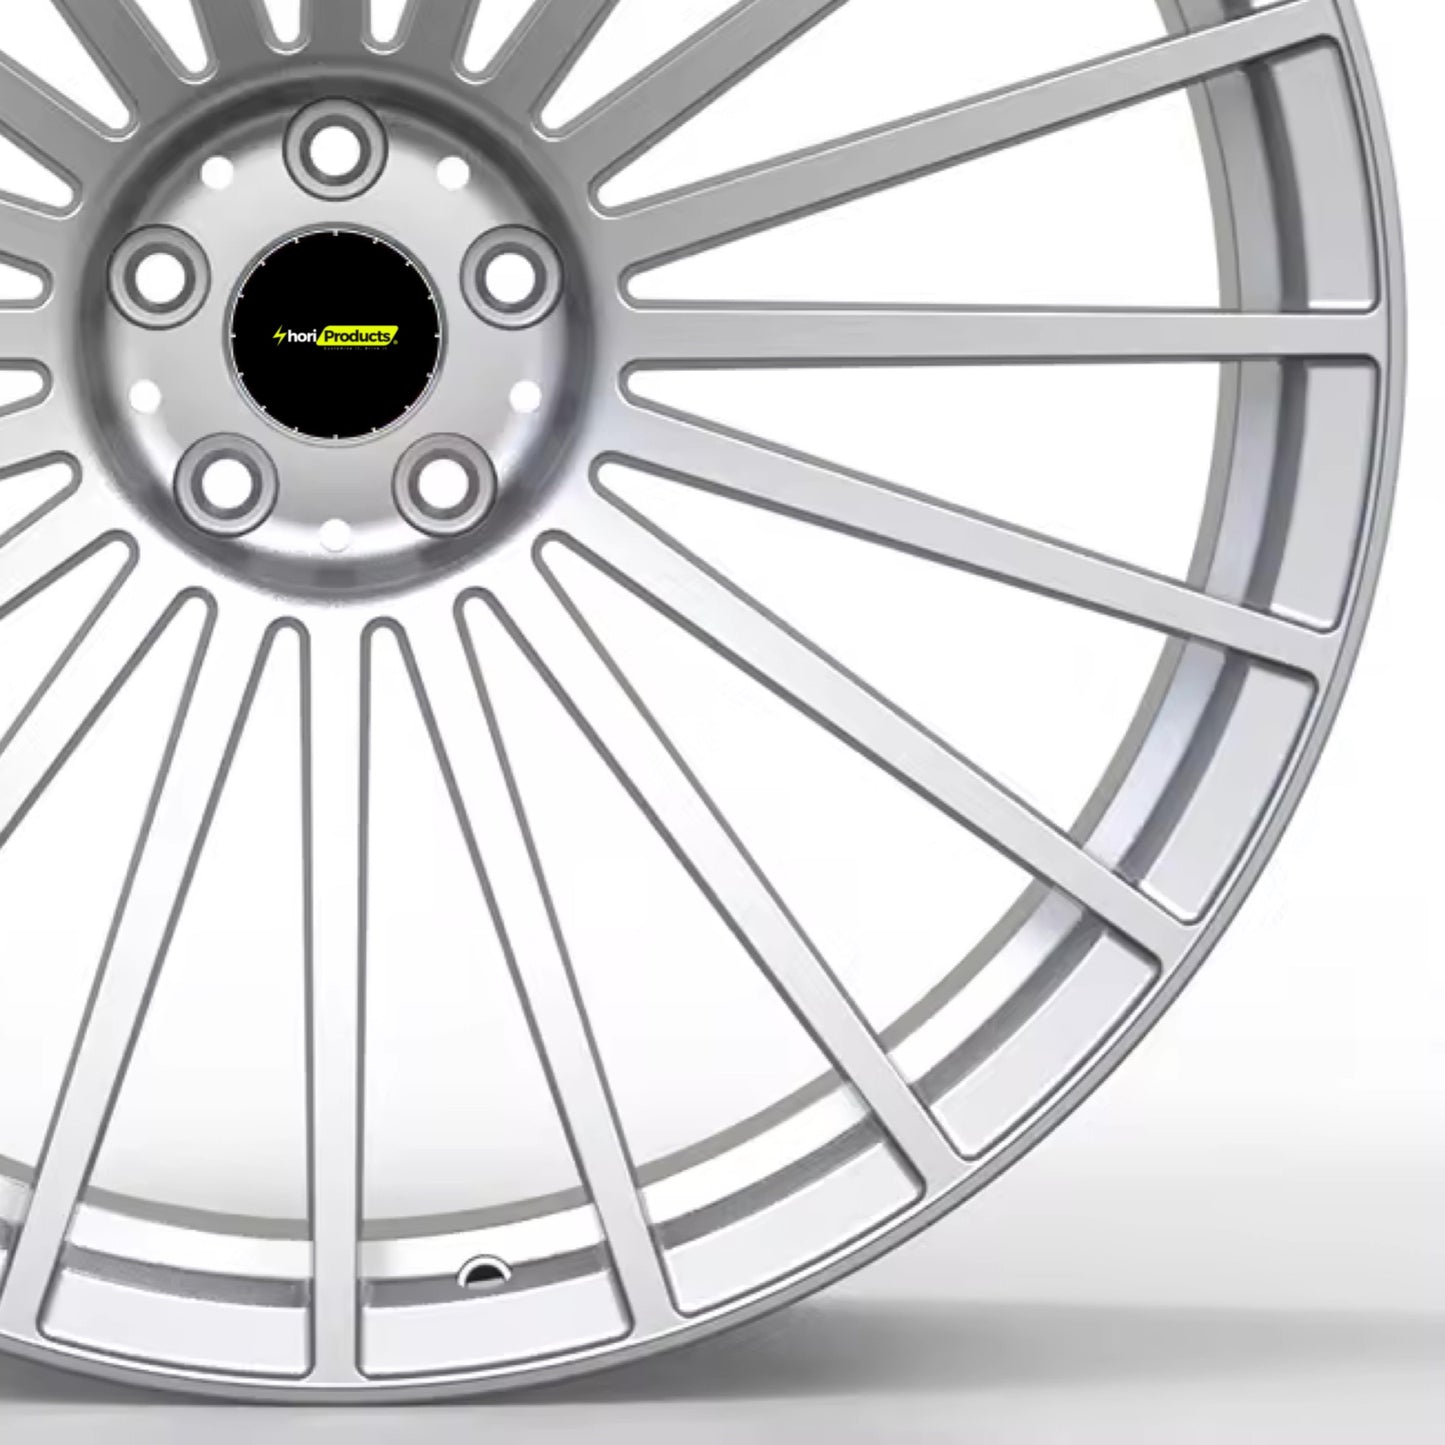 Model Y-ForgeX Wheels: Forged Aluminum 5X114.3 (Set of 4)